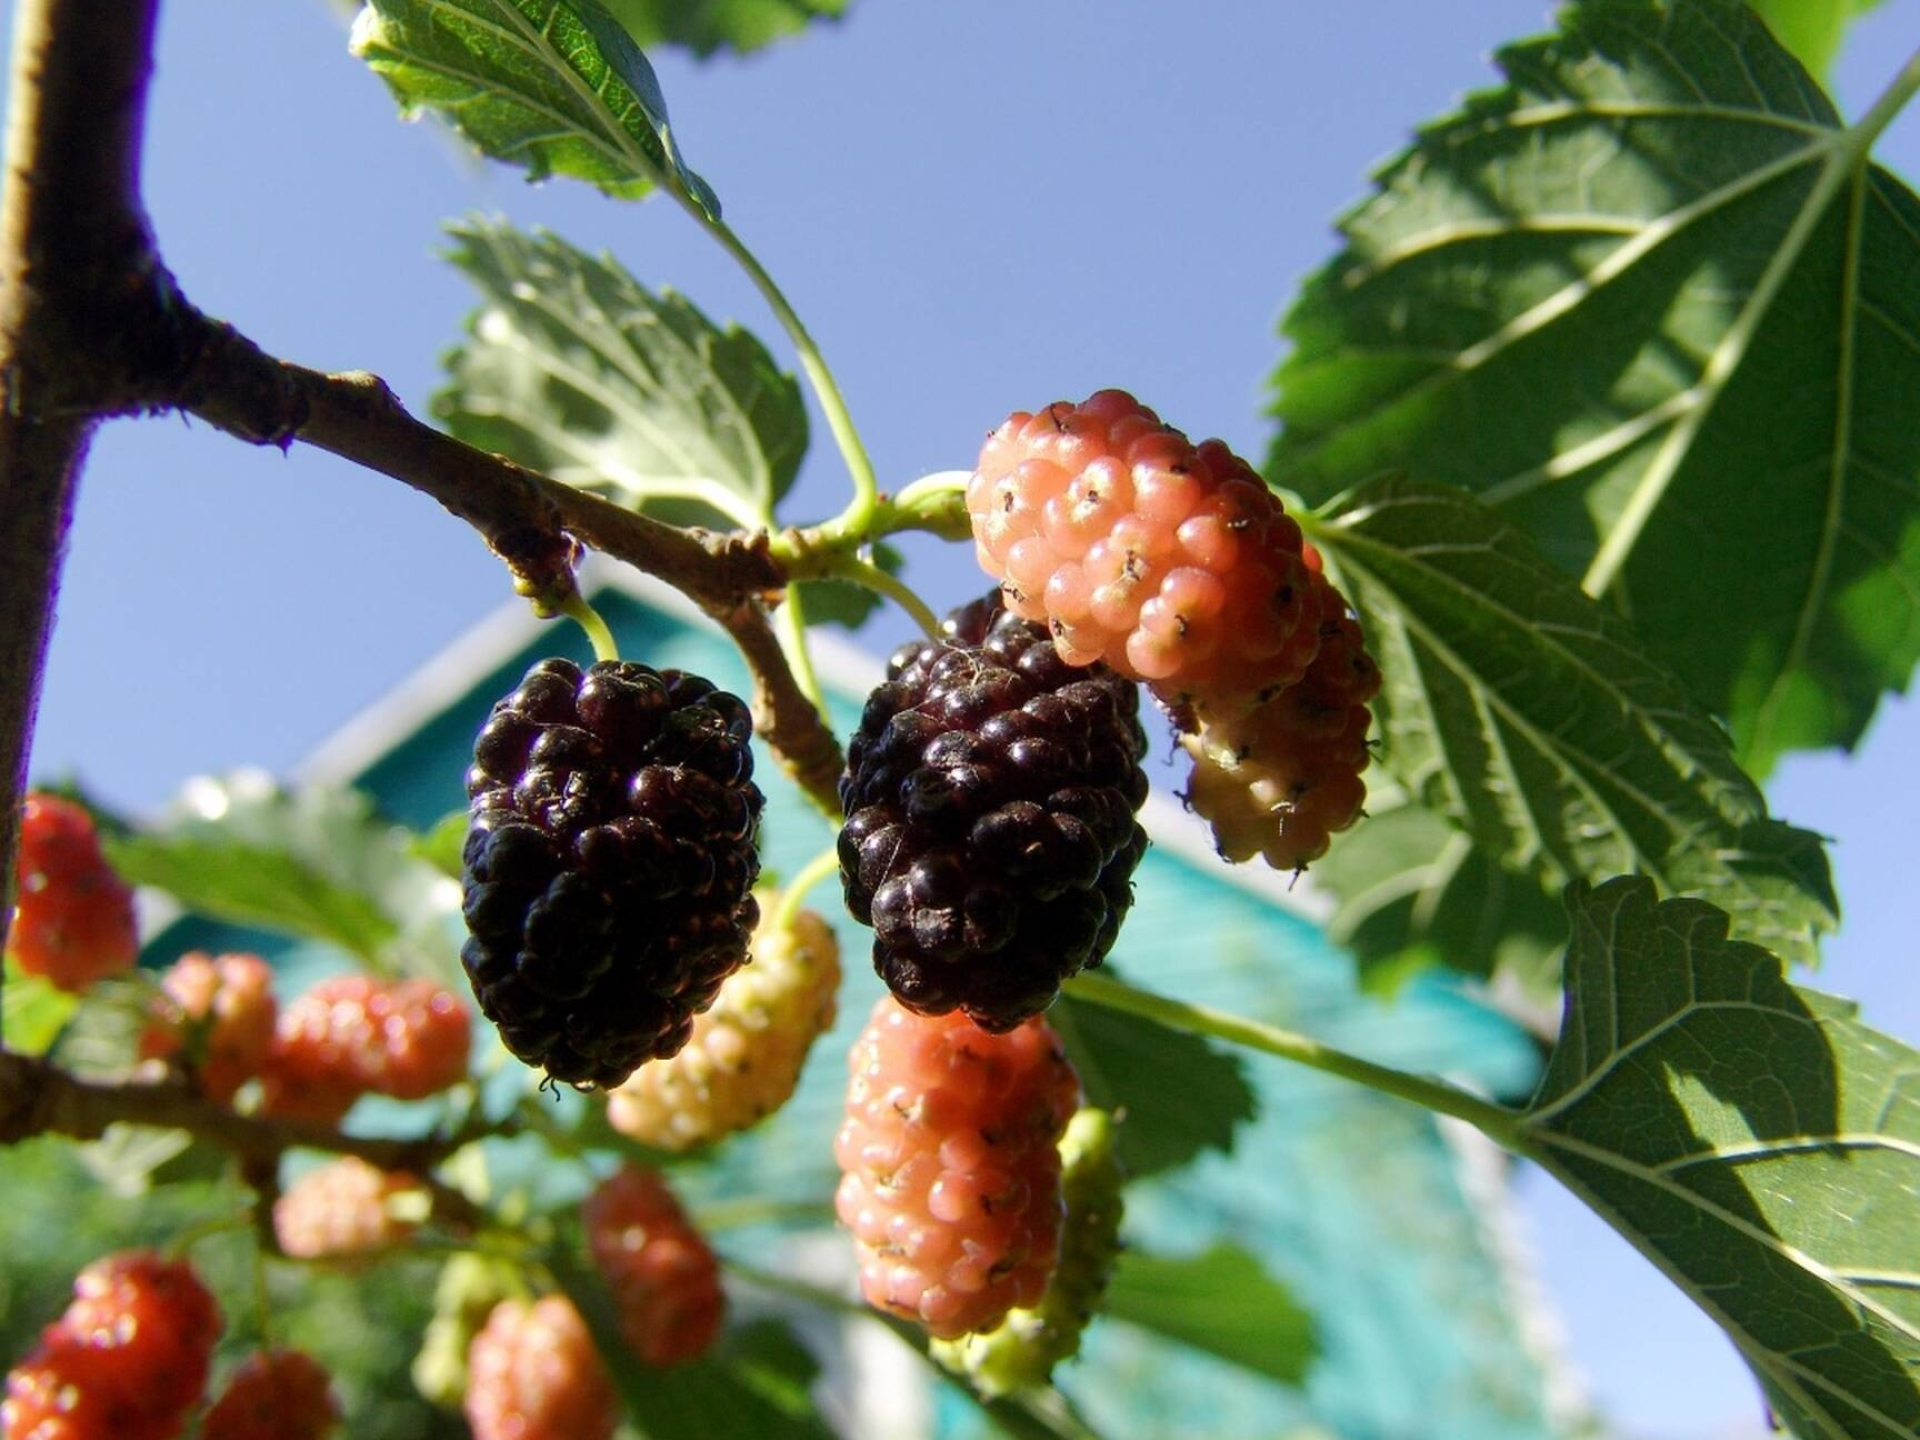 Mulberry berries image, Ripe fruits, Delicious berries, Free pictures, 1920x1440 HD Desktop